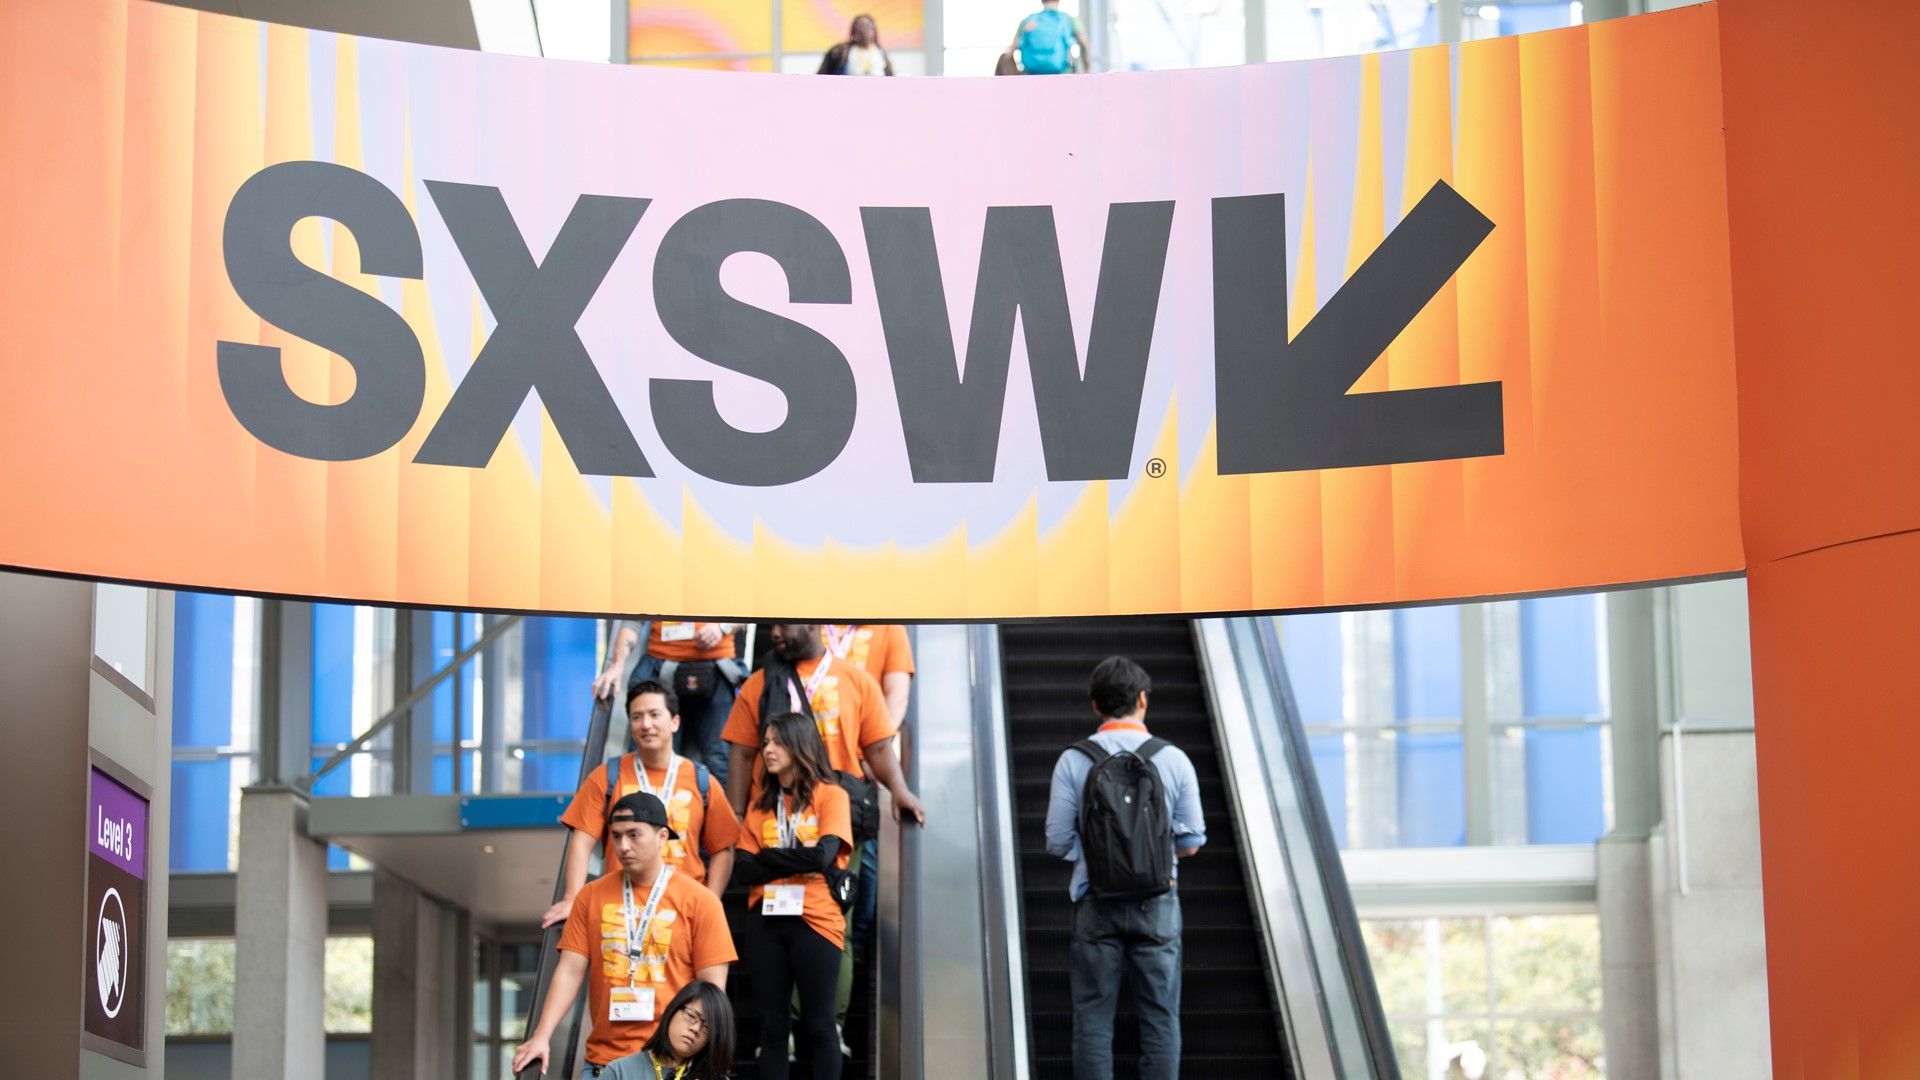 Transportation during SXSW can be tricky. Here's a look at SXSW road closures and ways to get around town during the festival.